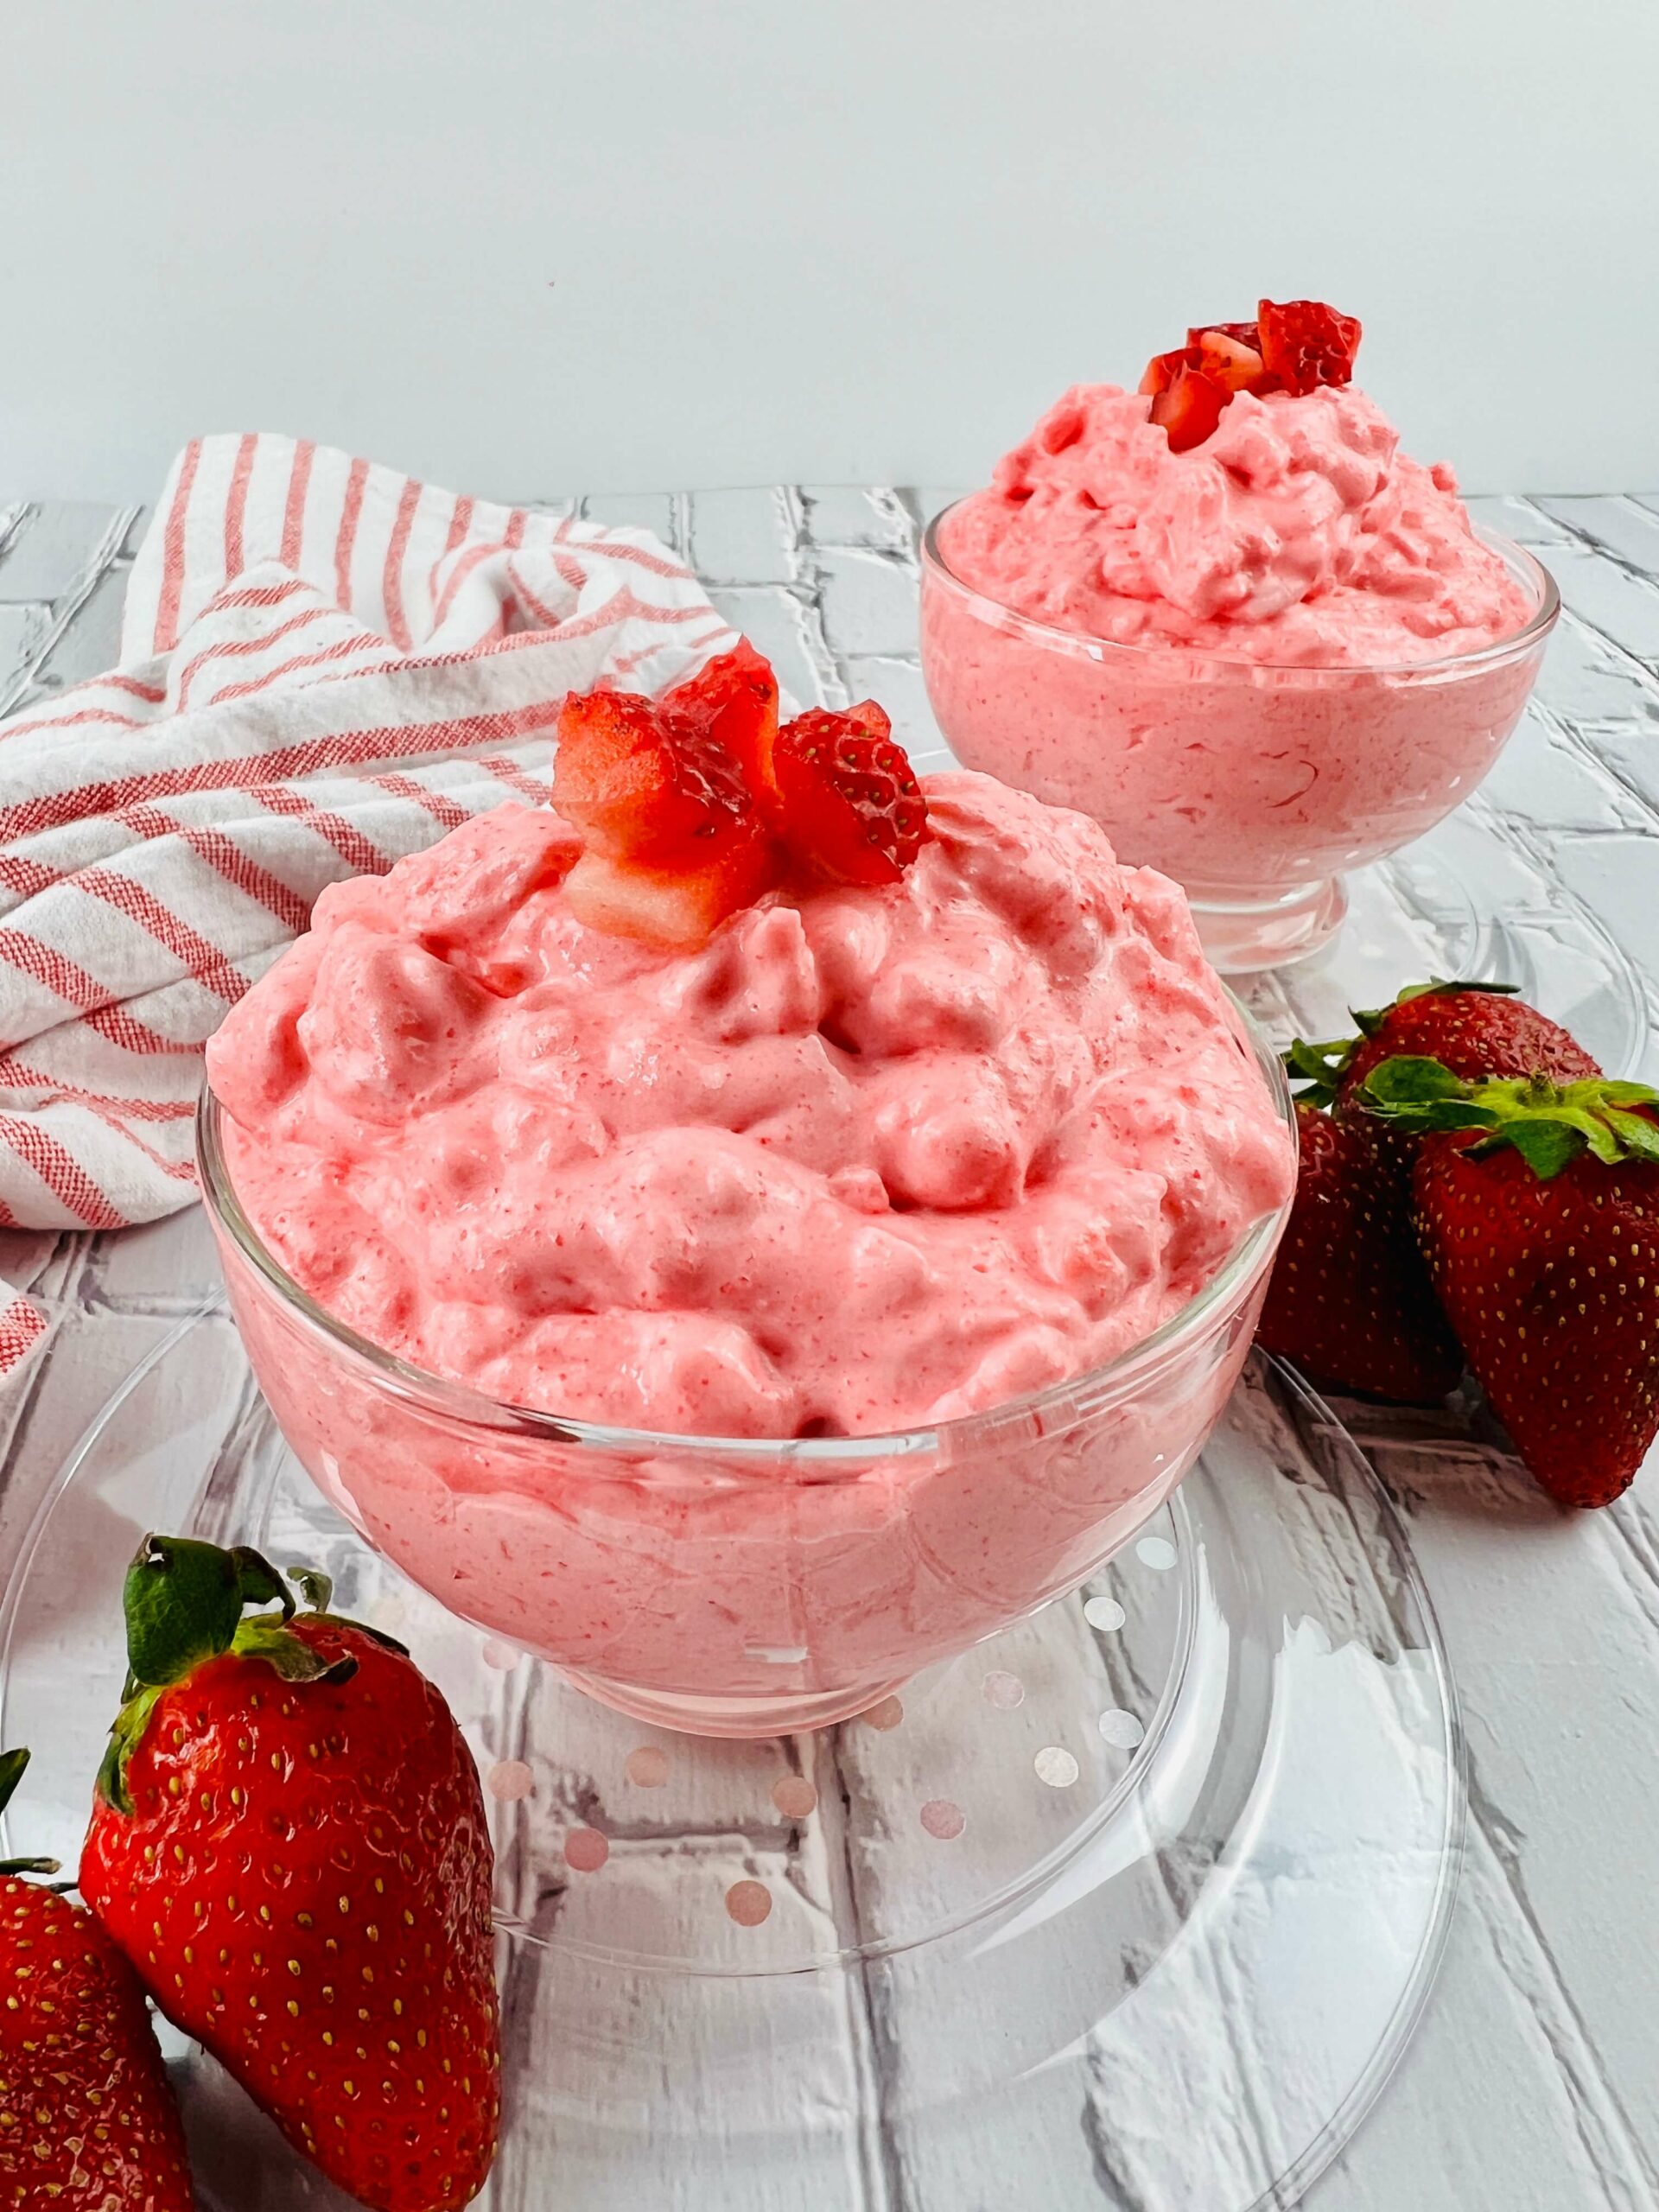 A side view of the strawberry jello salad.